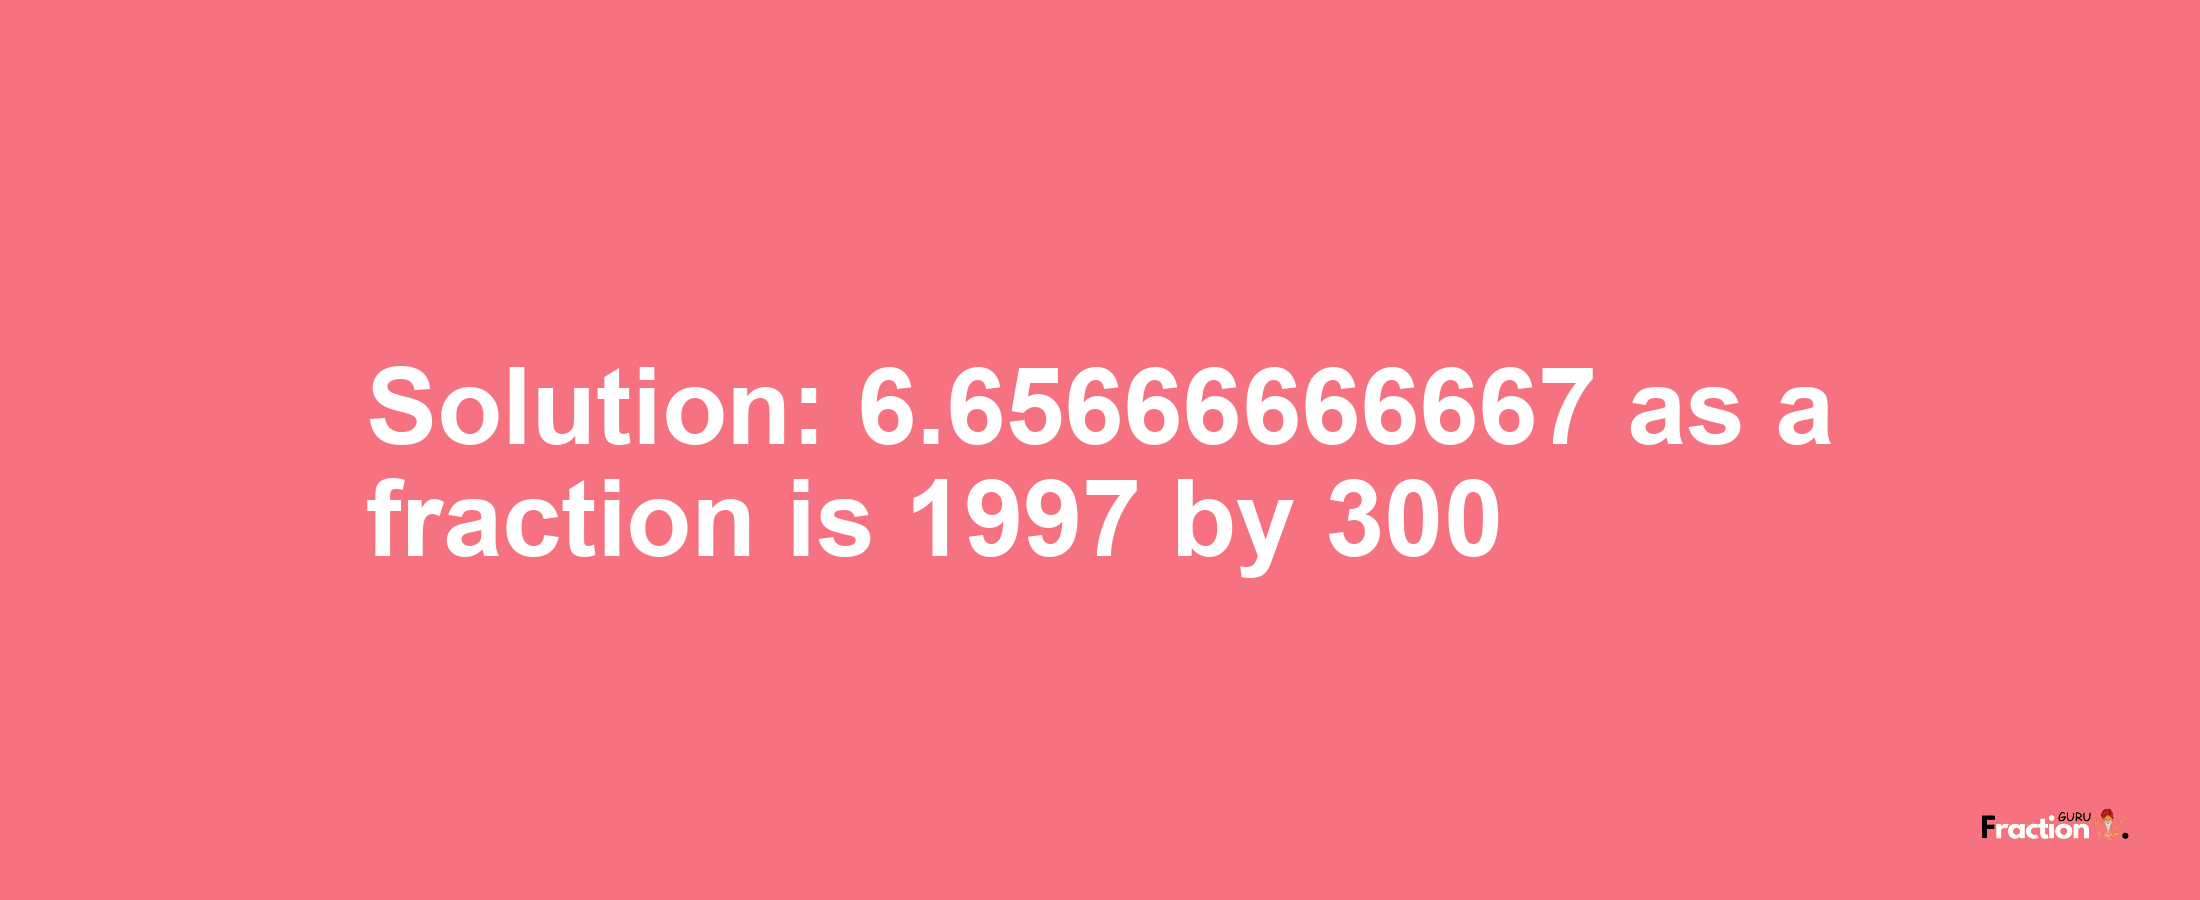 Solution:6.65666666667 as a fraction is 1997/300